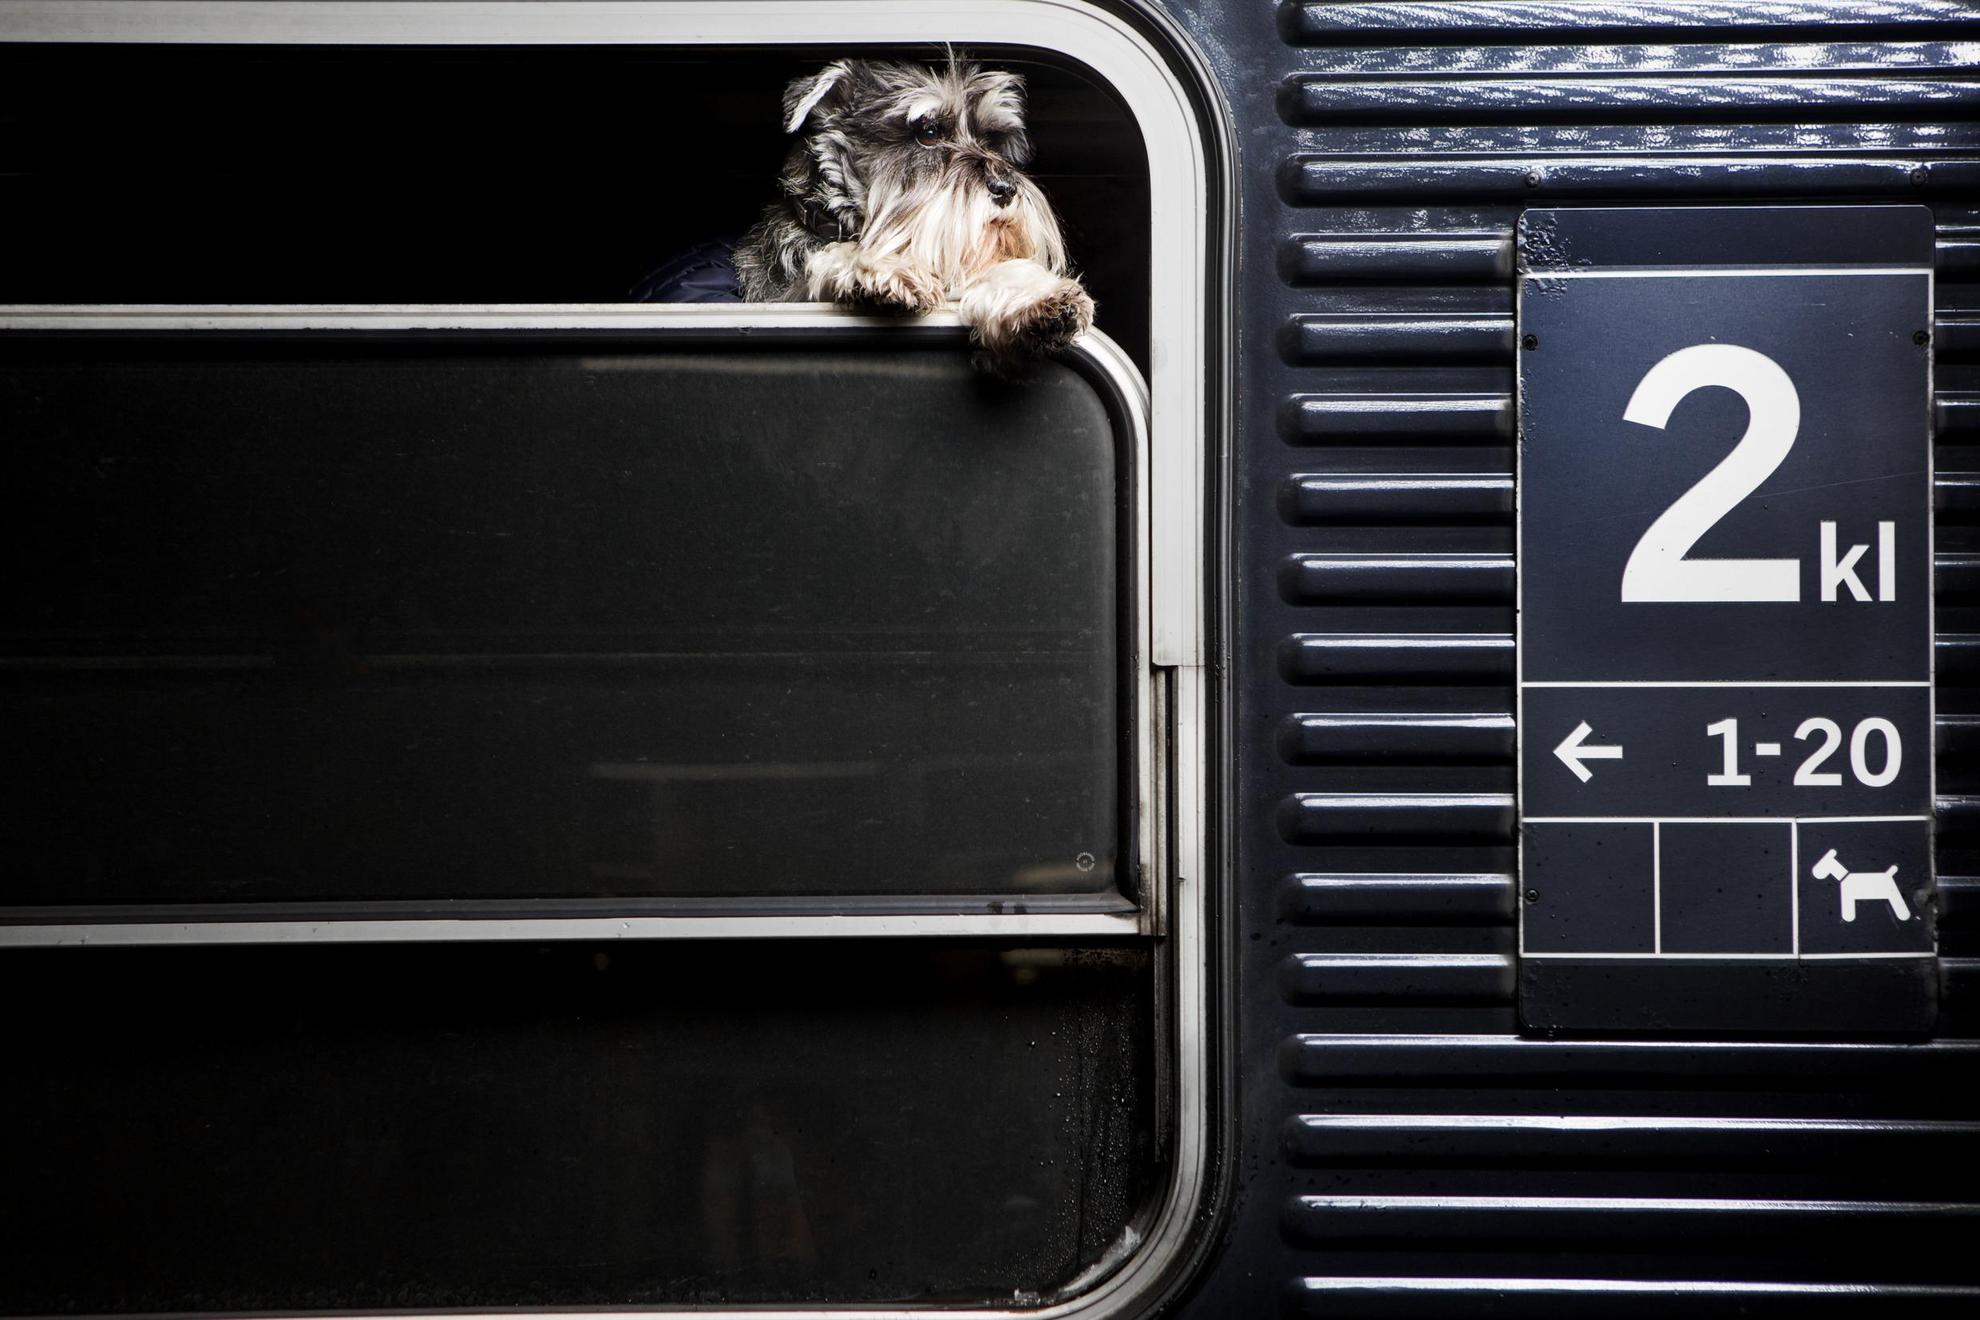 A dog looks out through the window from inside a train.